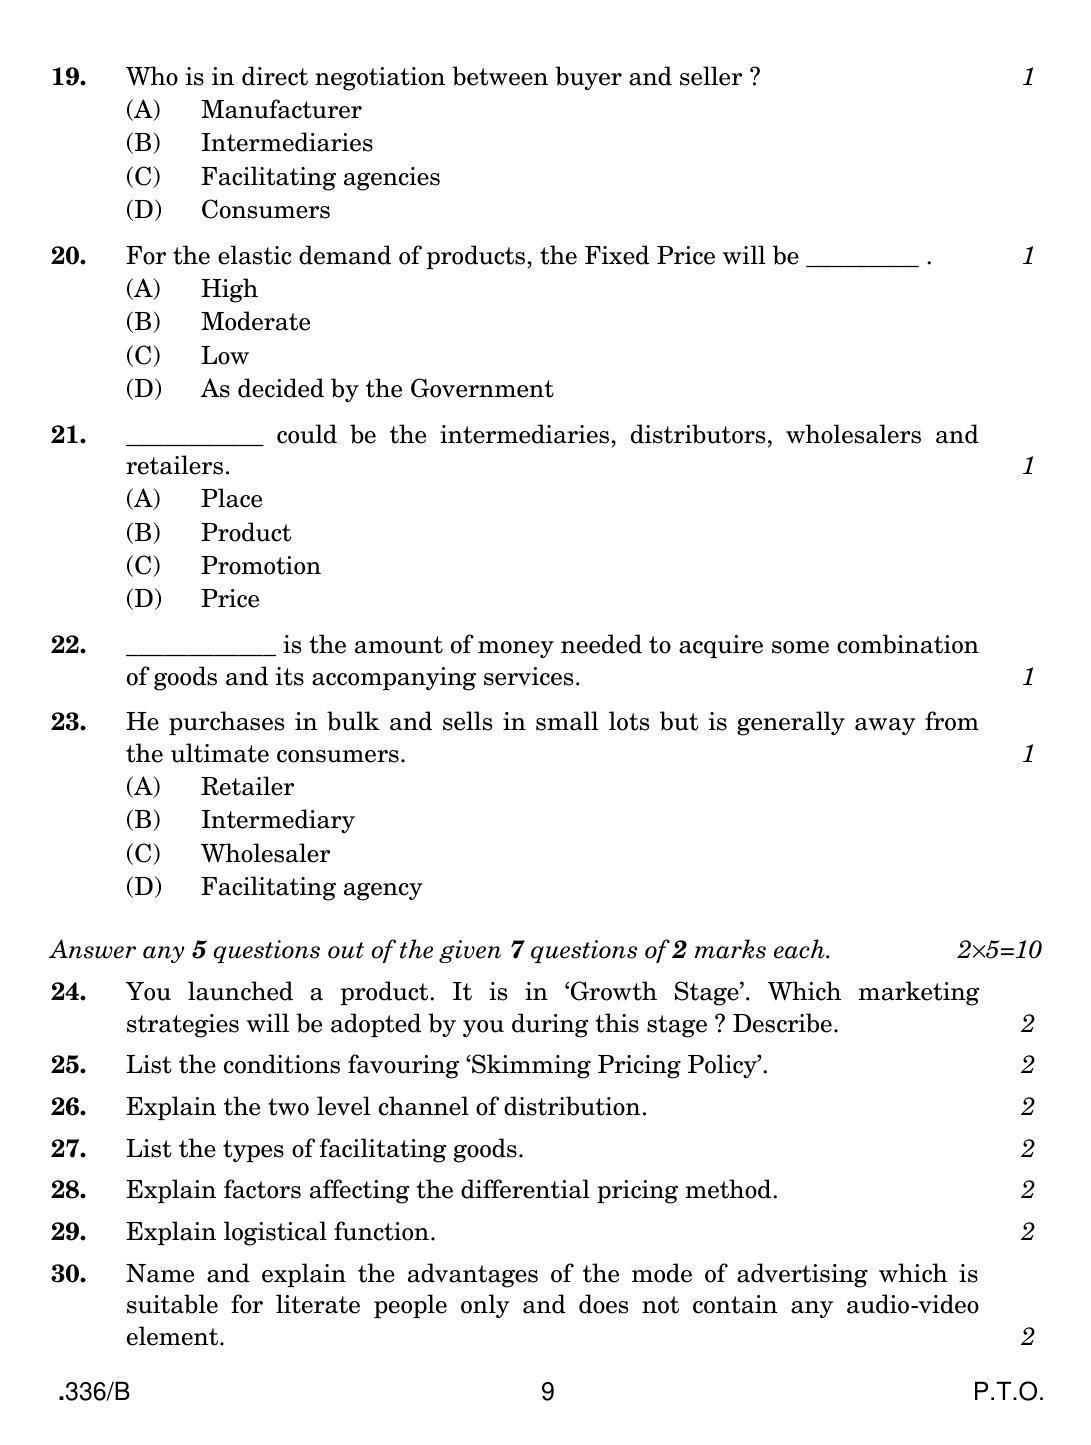 CBSE Class 12 Marketing 2020 Compartment Question Paper - Page 9